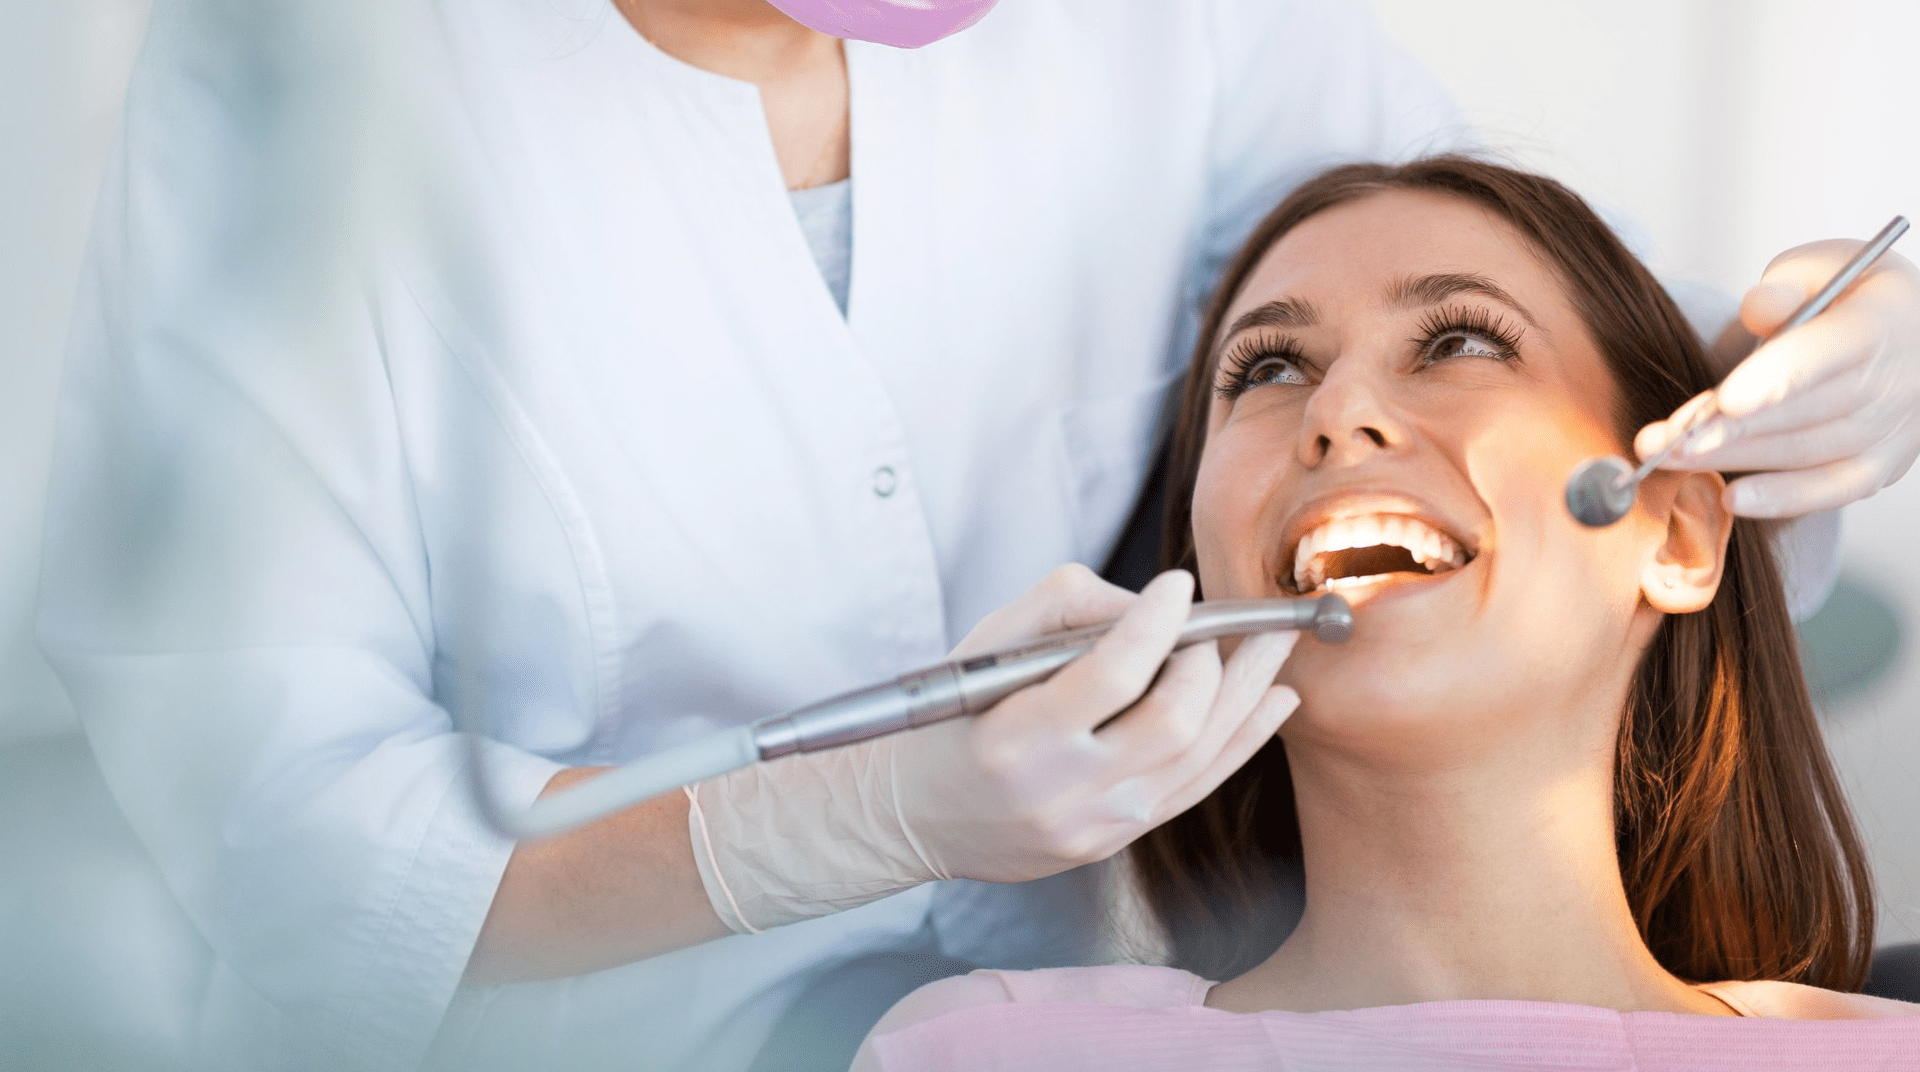 Teeth-Whitening Services, Dental Implant Treatment, Wisdom Tooth Removal Services